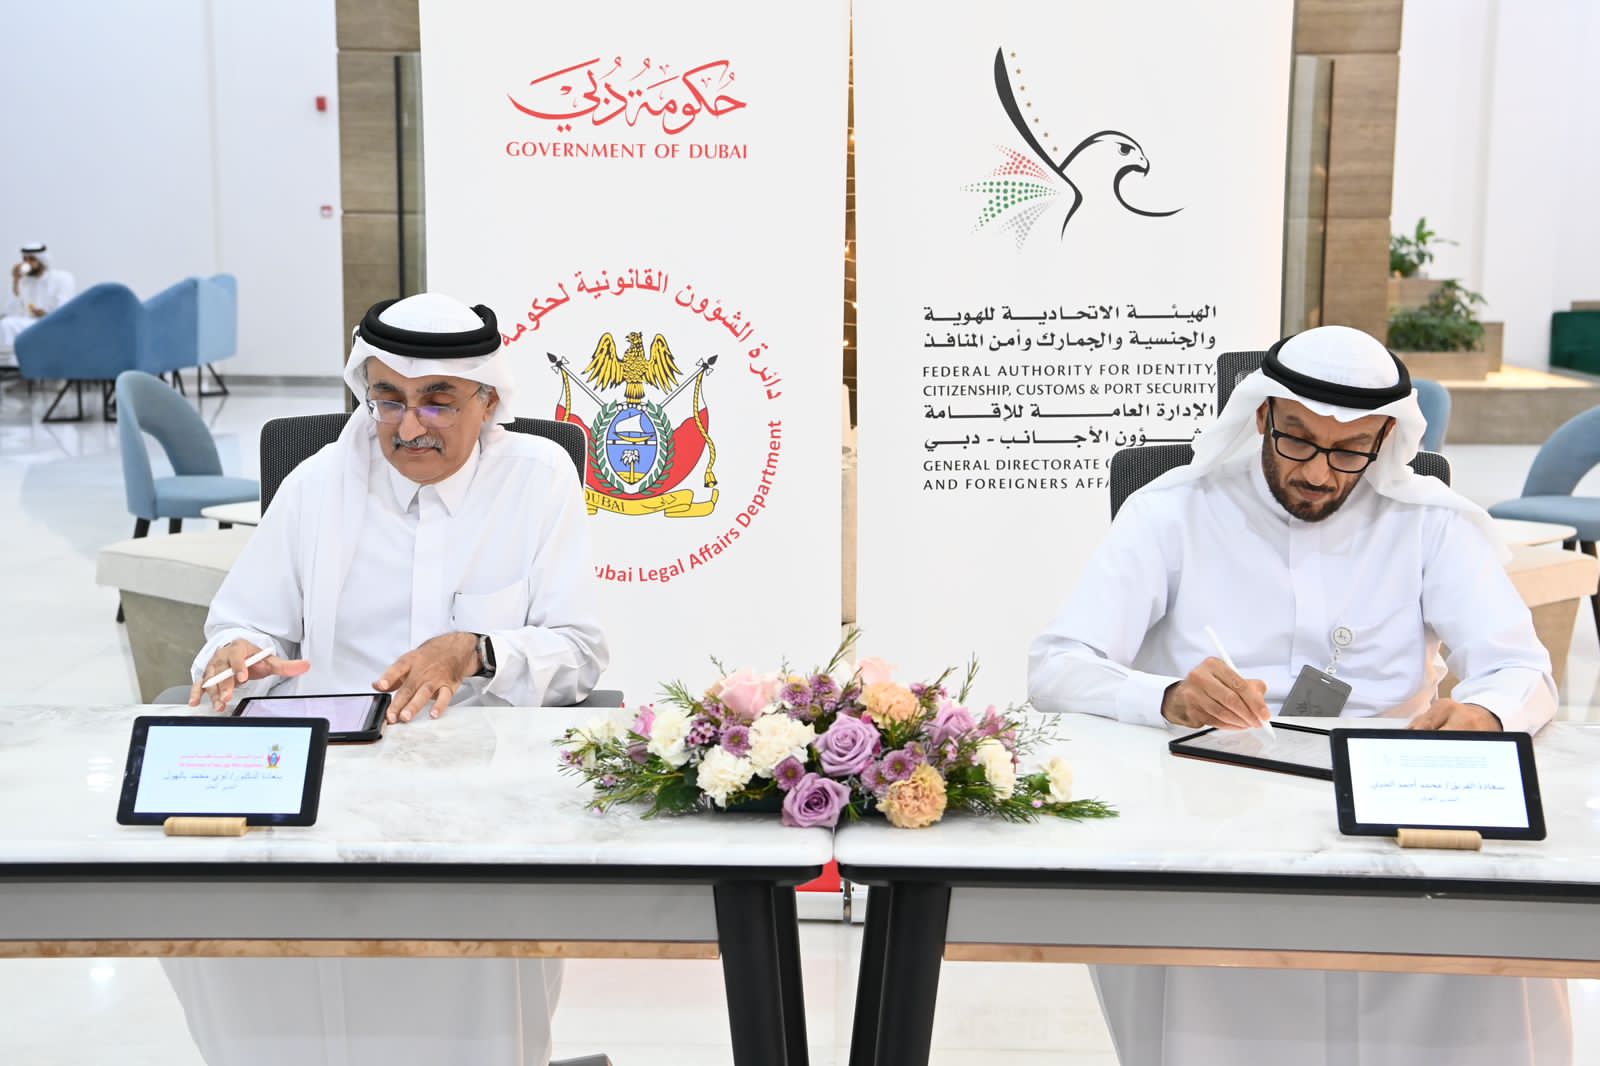 The General Directorate of Residency and Foreigners Affairs cooperates with the Government of Dubai Legal Affairs Department to enhance strategic partnership relations effectively according to an institutional system